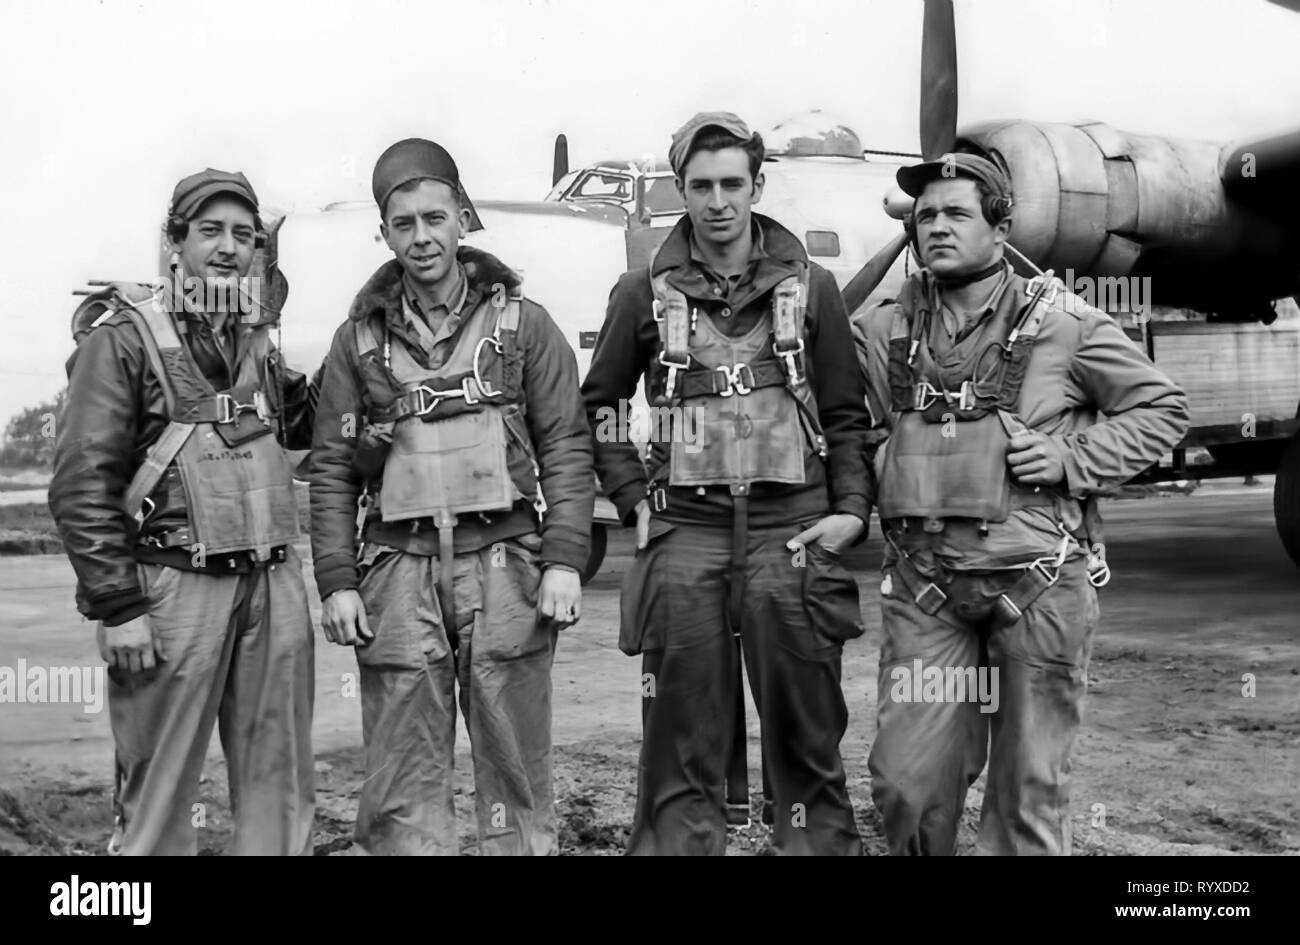 Personal photographs and memorabilia of fighting Americans during the Second World War. B-25 Mitchell medium bomber aircrew. Stock Photo